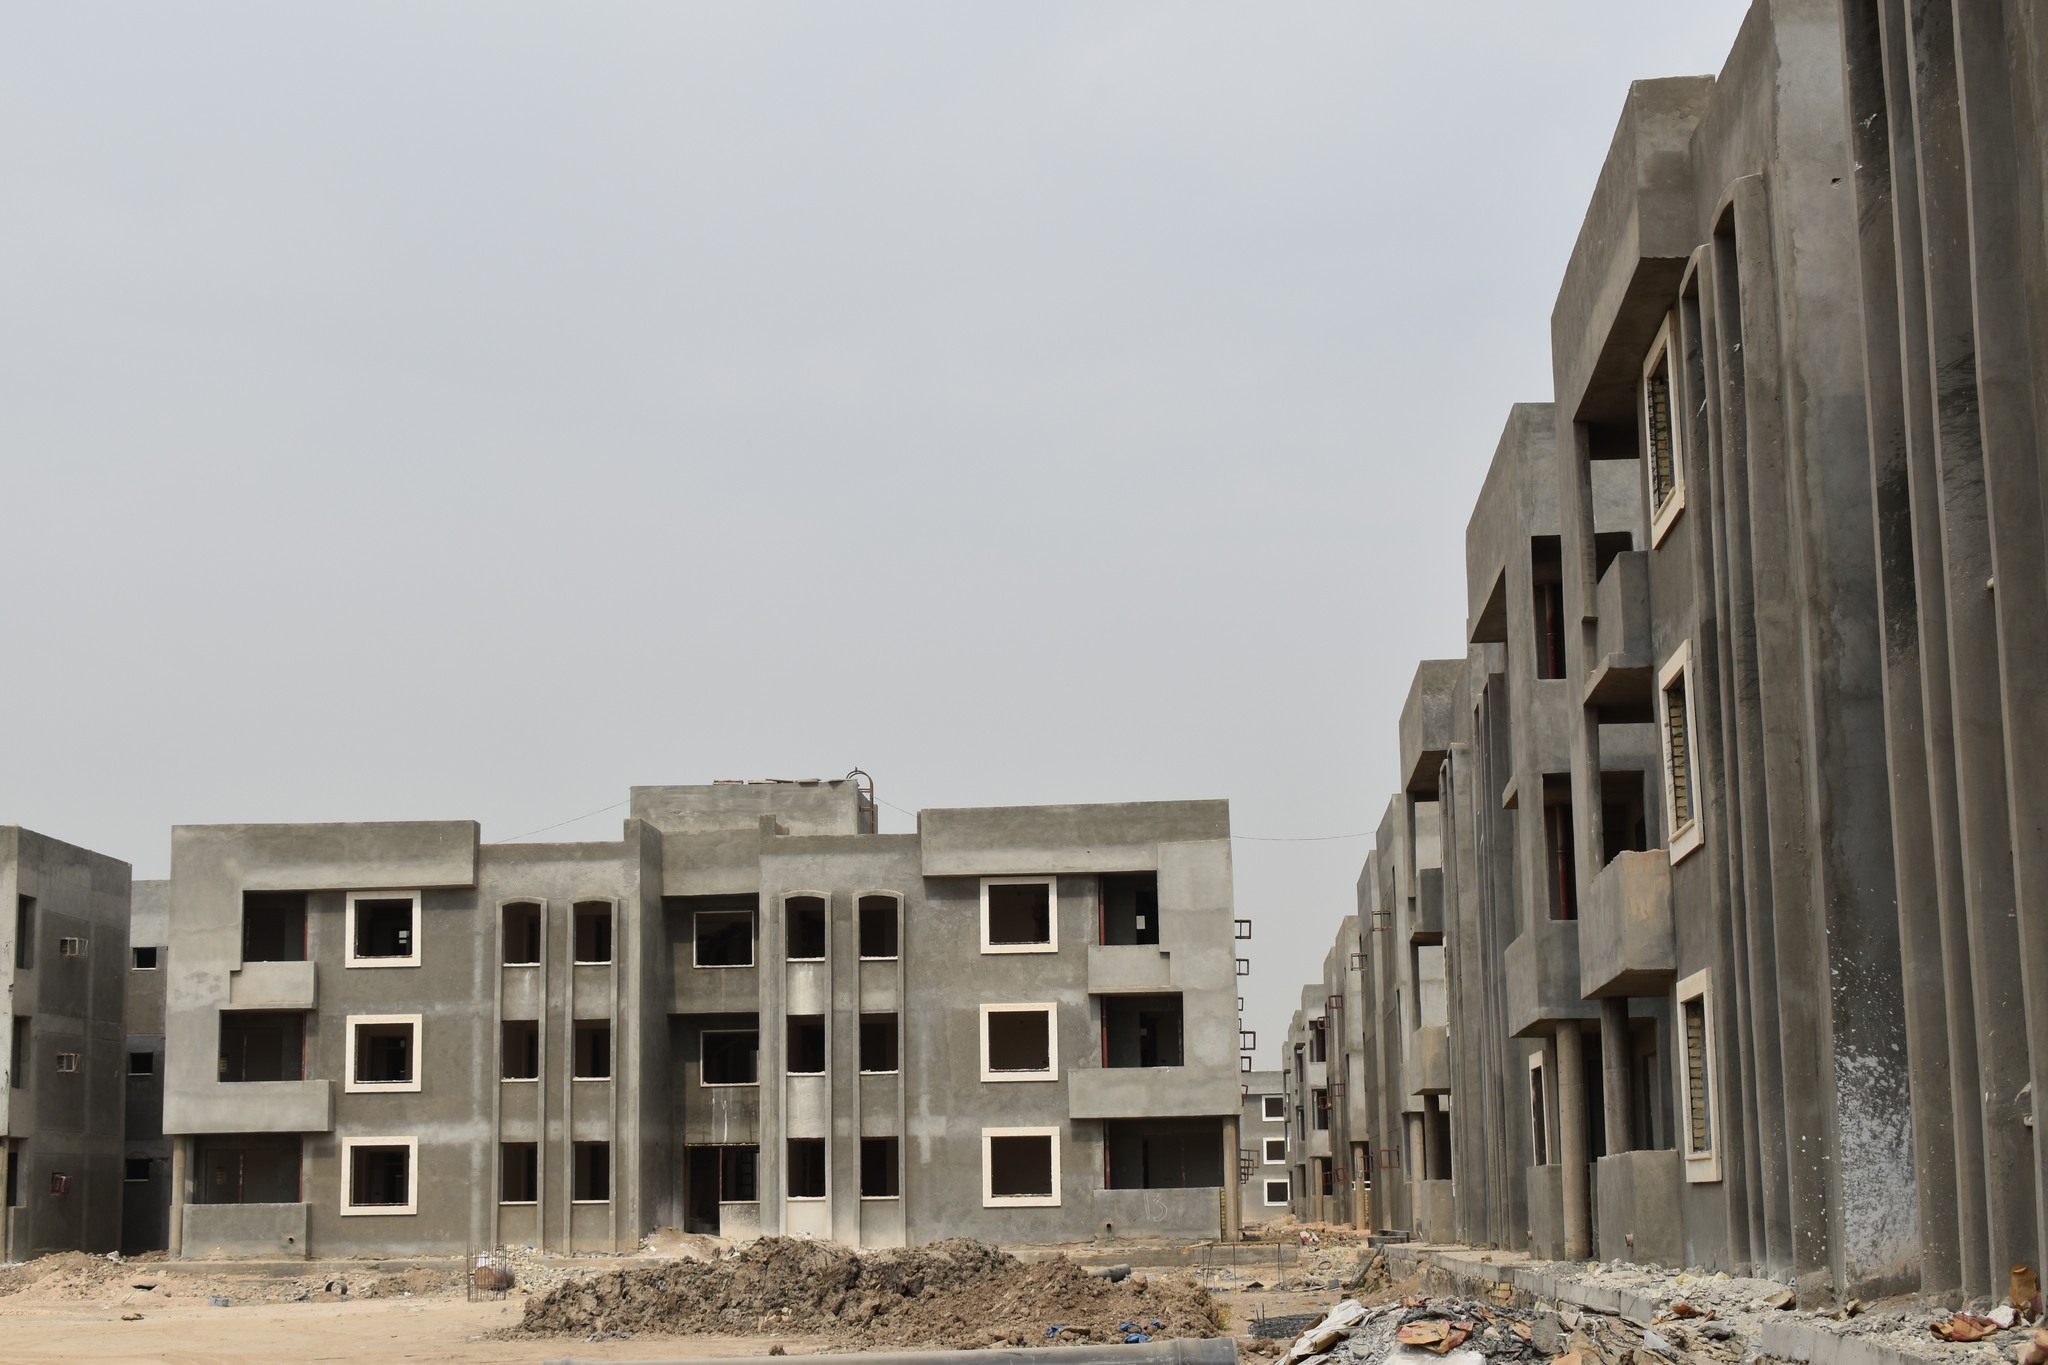 Mr. General Manager Of The Company: The Work Stages Are Advanced In A Project To Build Low-Cost Housing Units In Babil Governorate